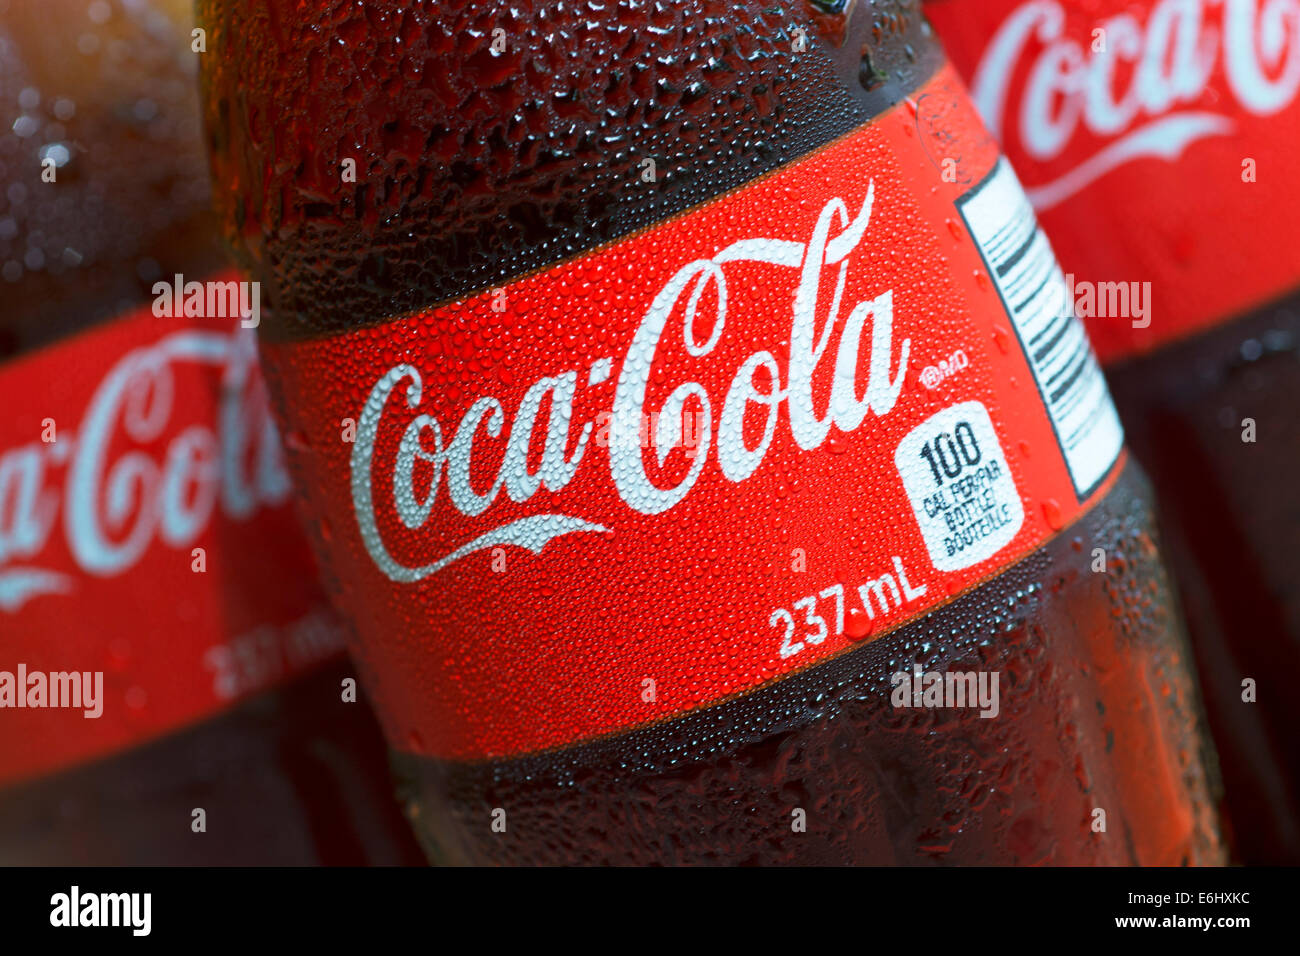 Bottles of Coca Cola, Coke Bottles Cold with Water Droplet Stock Photo